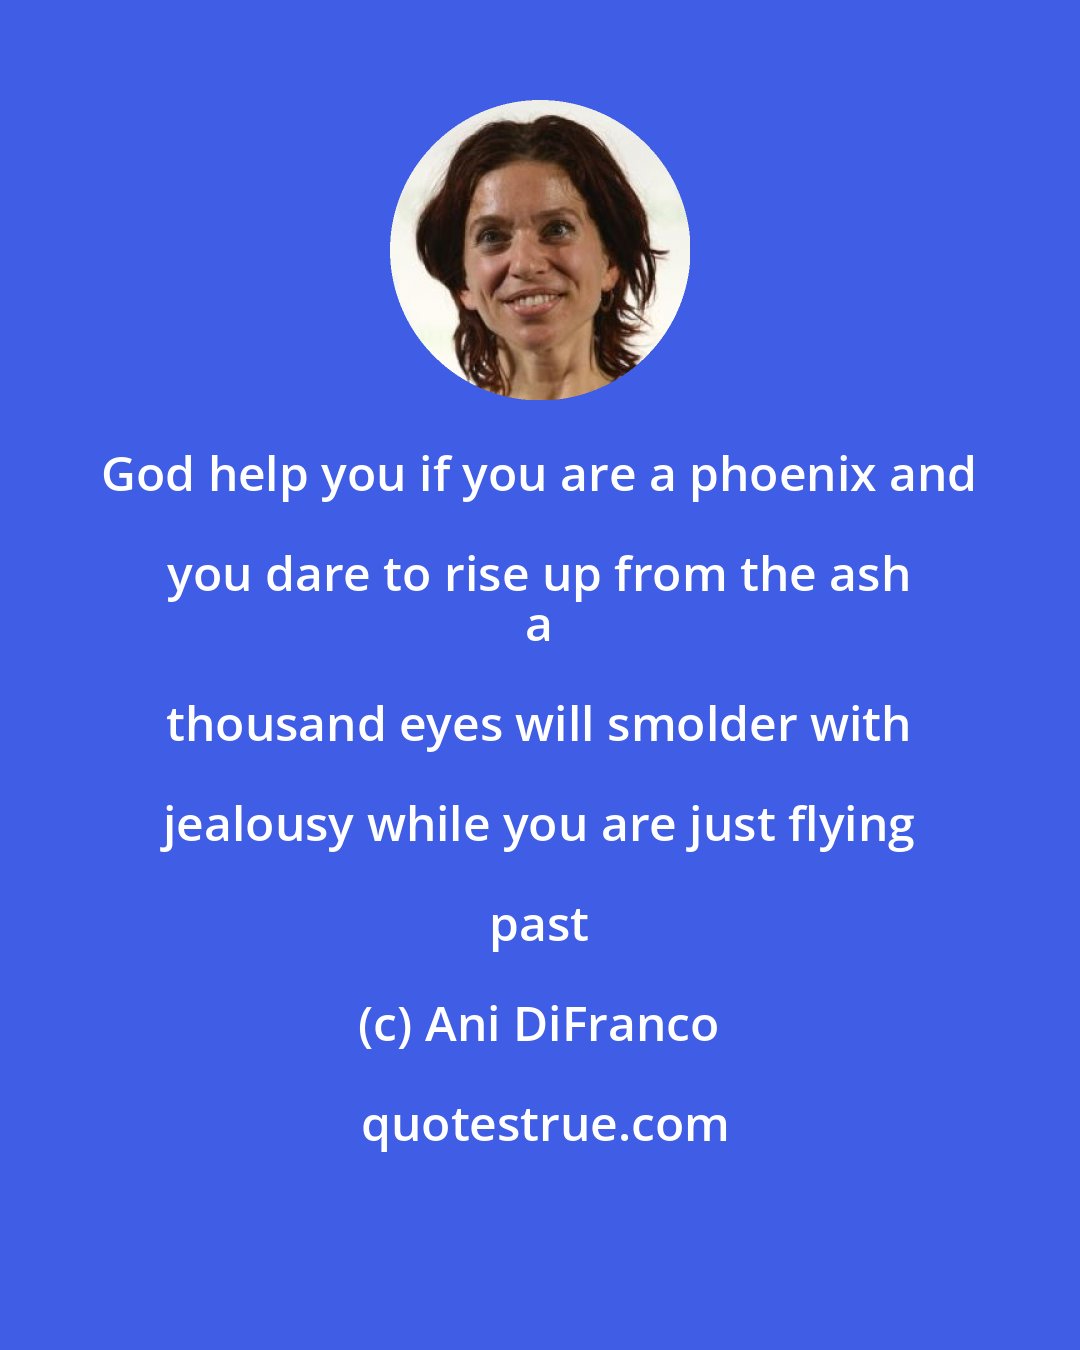 Ani DiFranco: God help you if you are a phoenix and you dare to rise up from the ash 
 a thousand eyes will smolder with jealousy while you are just flying past